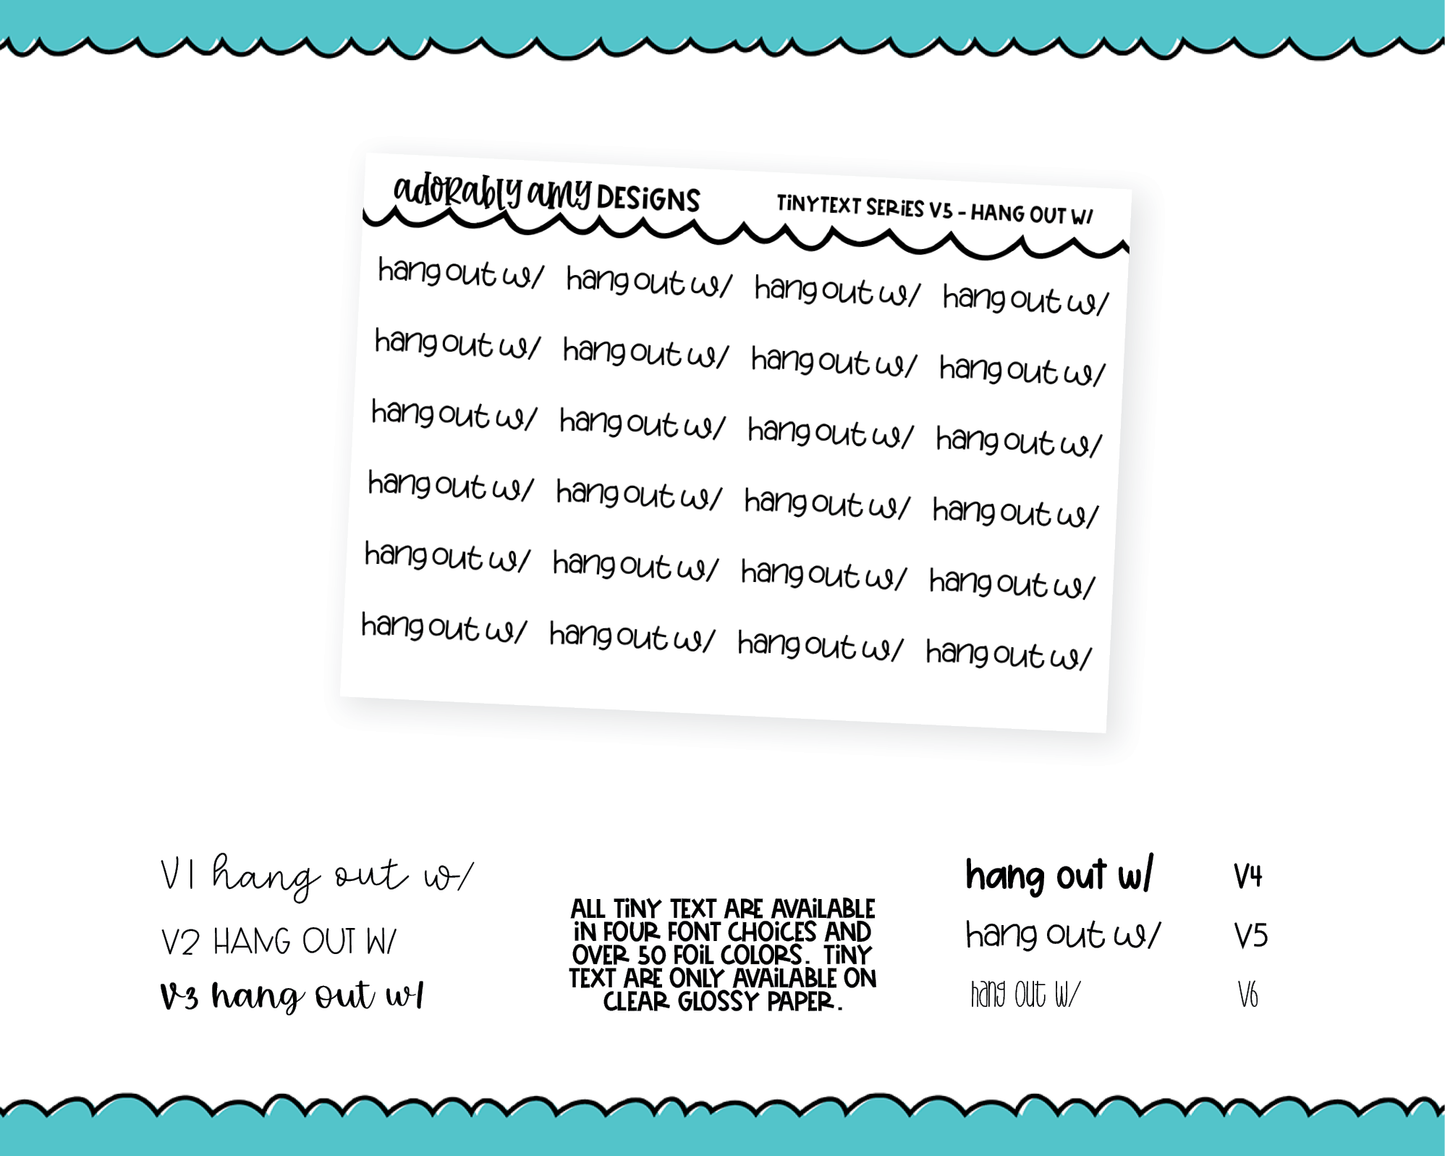 Foiled Tiny Text Series - Hang Out With Checklist Size Planner Stickers for any Planner or Insert